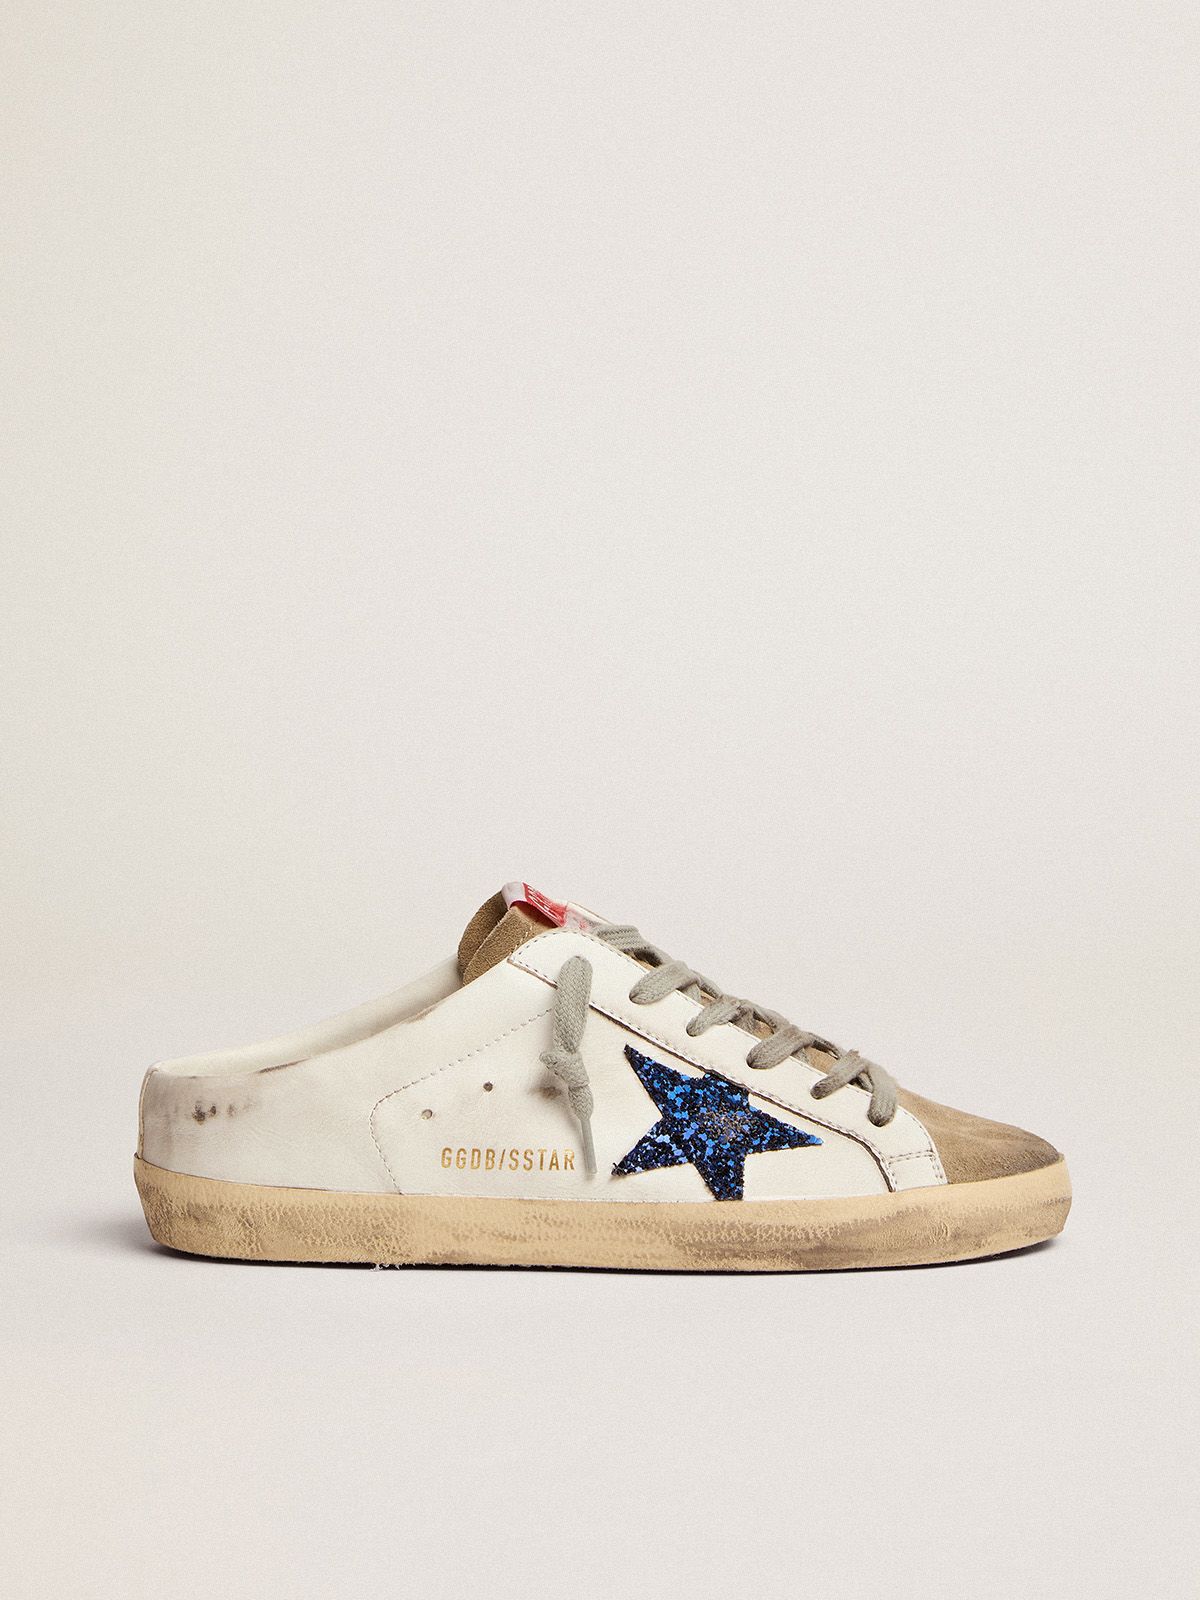 golden goose and glitter with star white leather dove-gray blue suede Super-Star in Sabots tongue